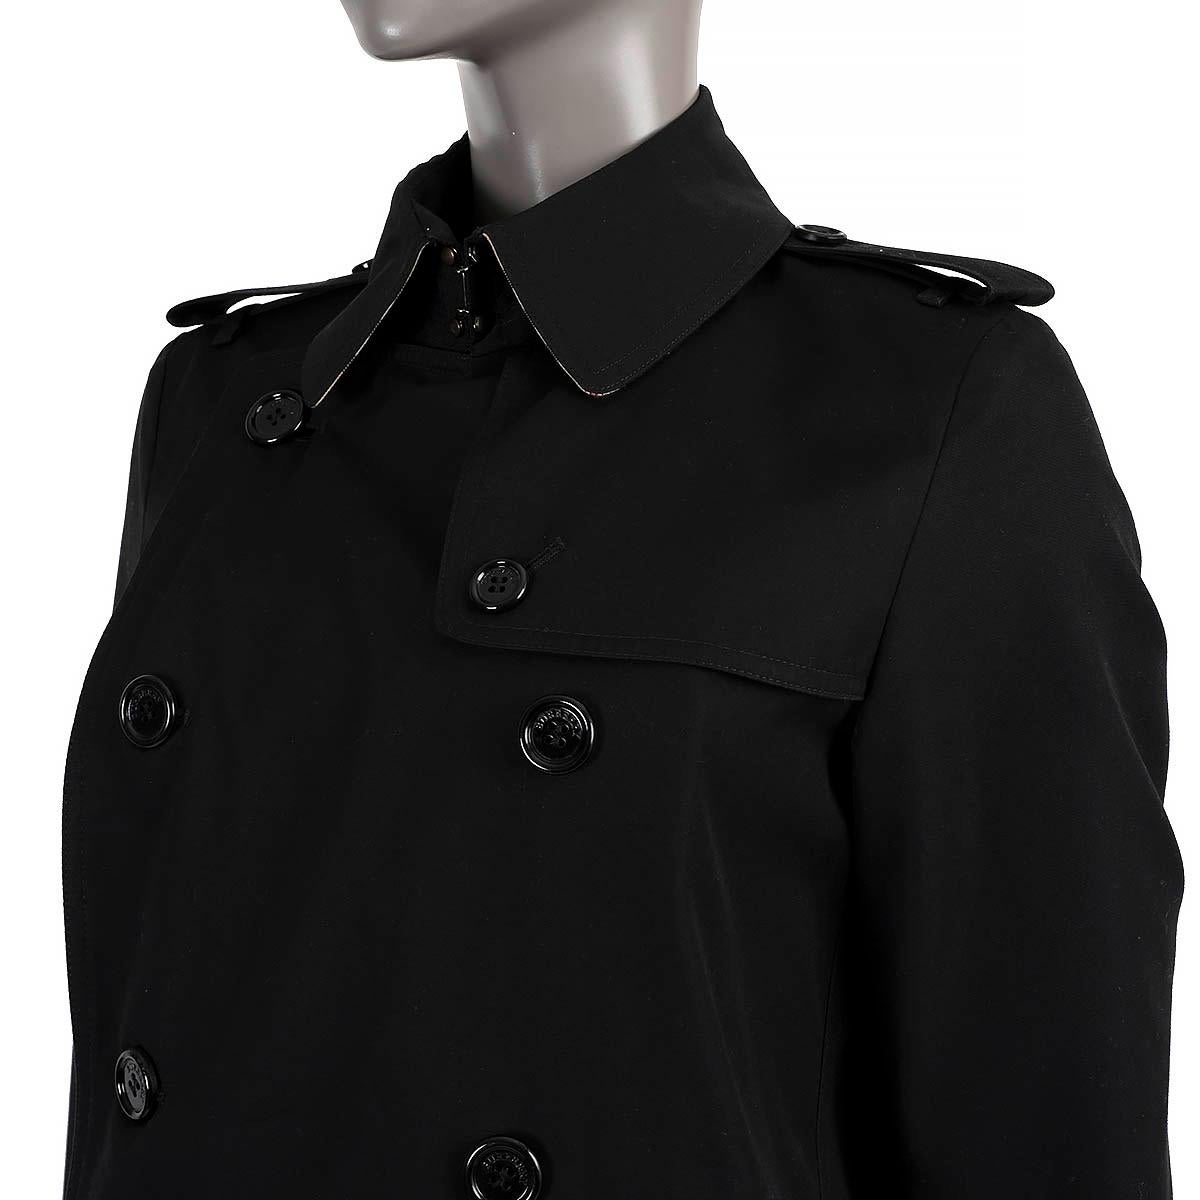 BURBERRY black cotton blend WATERLOO Trench Coat Jacket 10 M For Sale 1